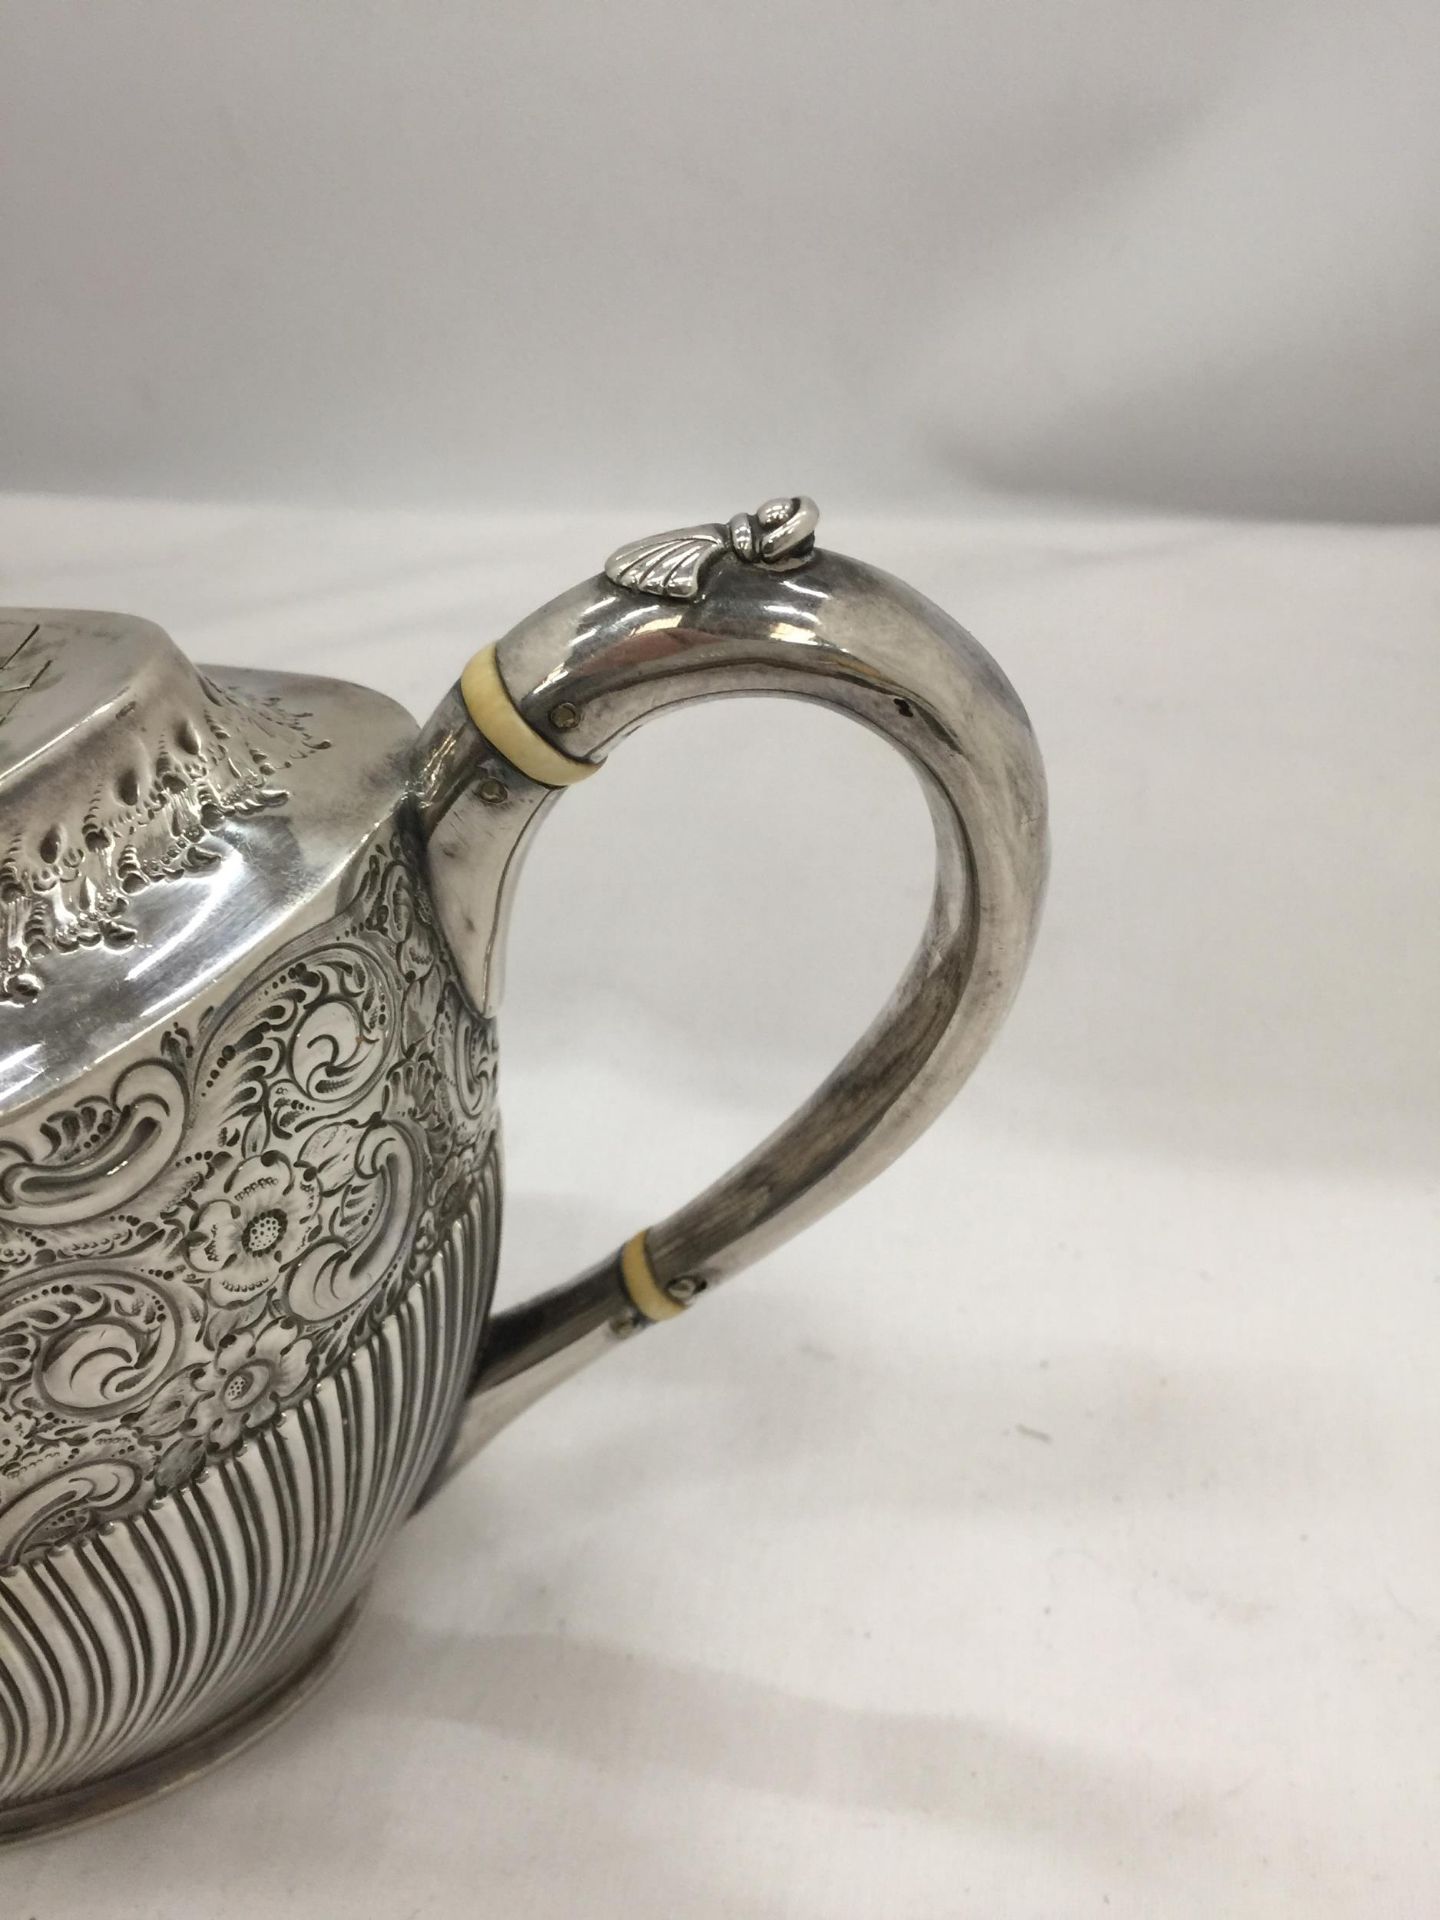 AN EDWARD VII 1902 SILVER TEAPOT WITH CHASED AND ENGRAVED FLORAL DESIGN, MAKER INDISTINCT, GROSS 546 - Image 4 of 7